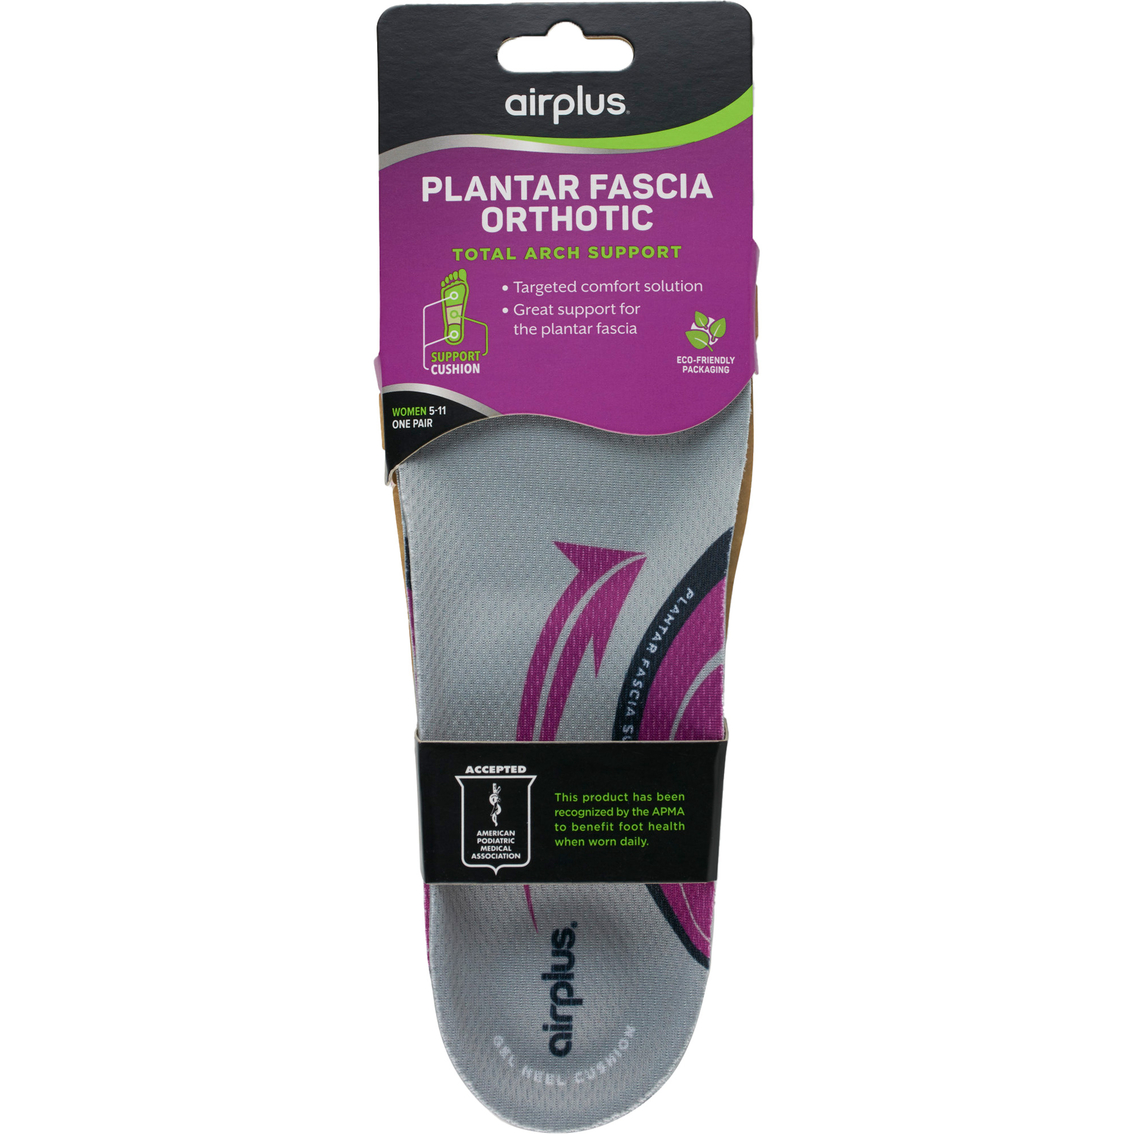 Airplus Plantar Fascia Orthotic Insole for Women, Size 5 to 11 - Image 6 of 7